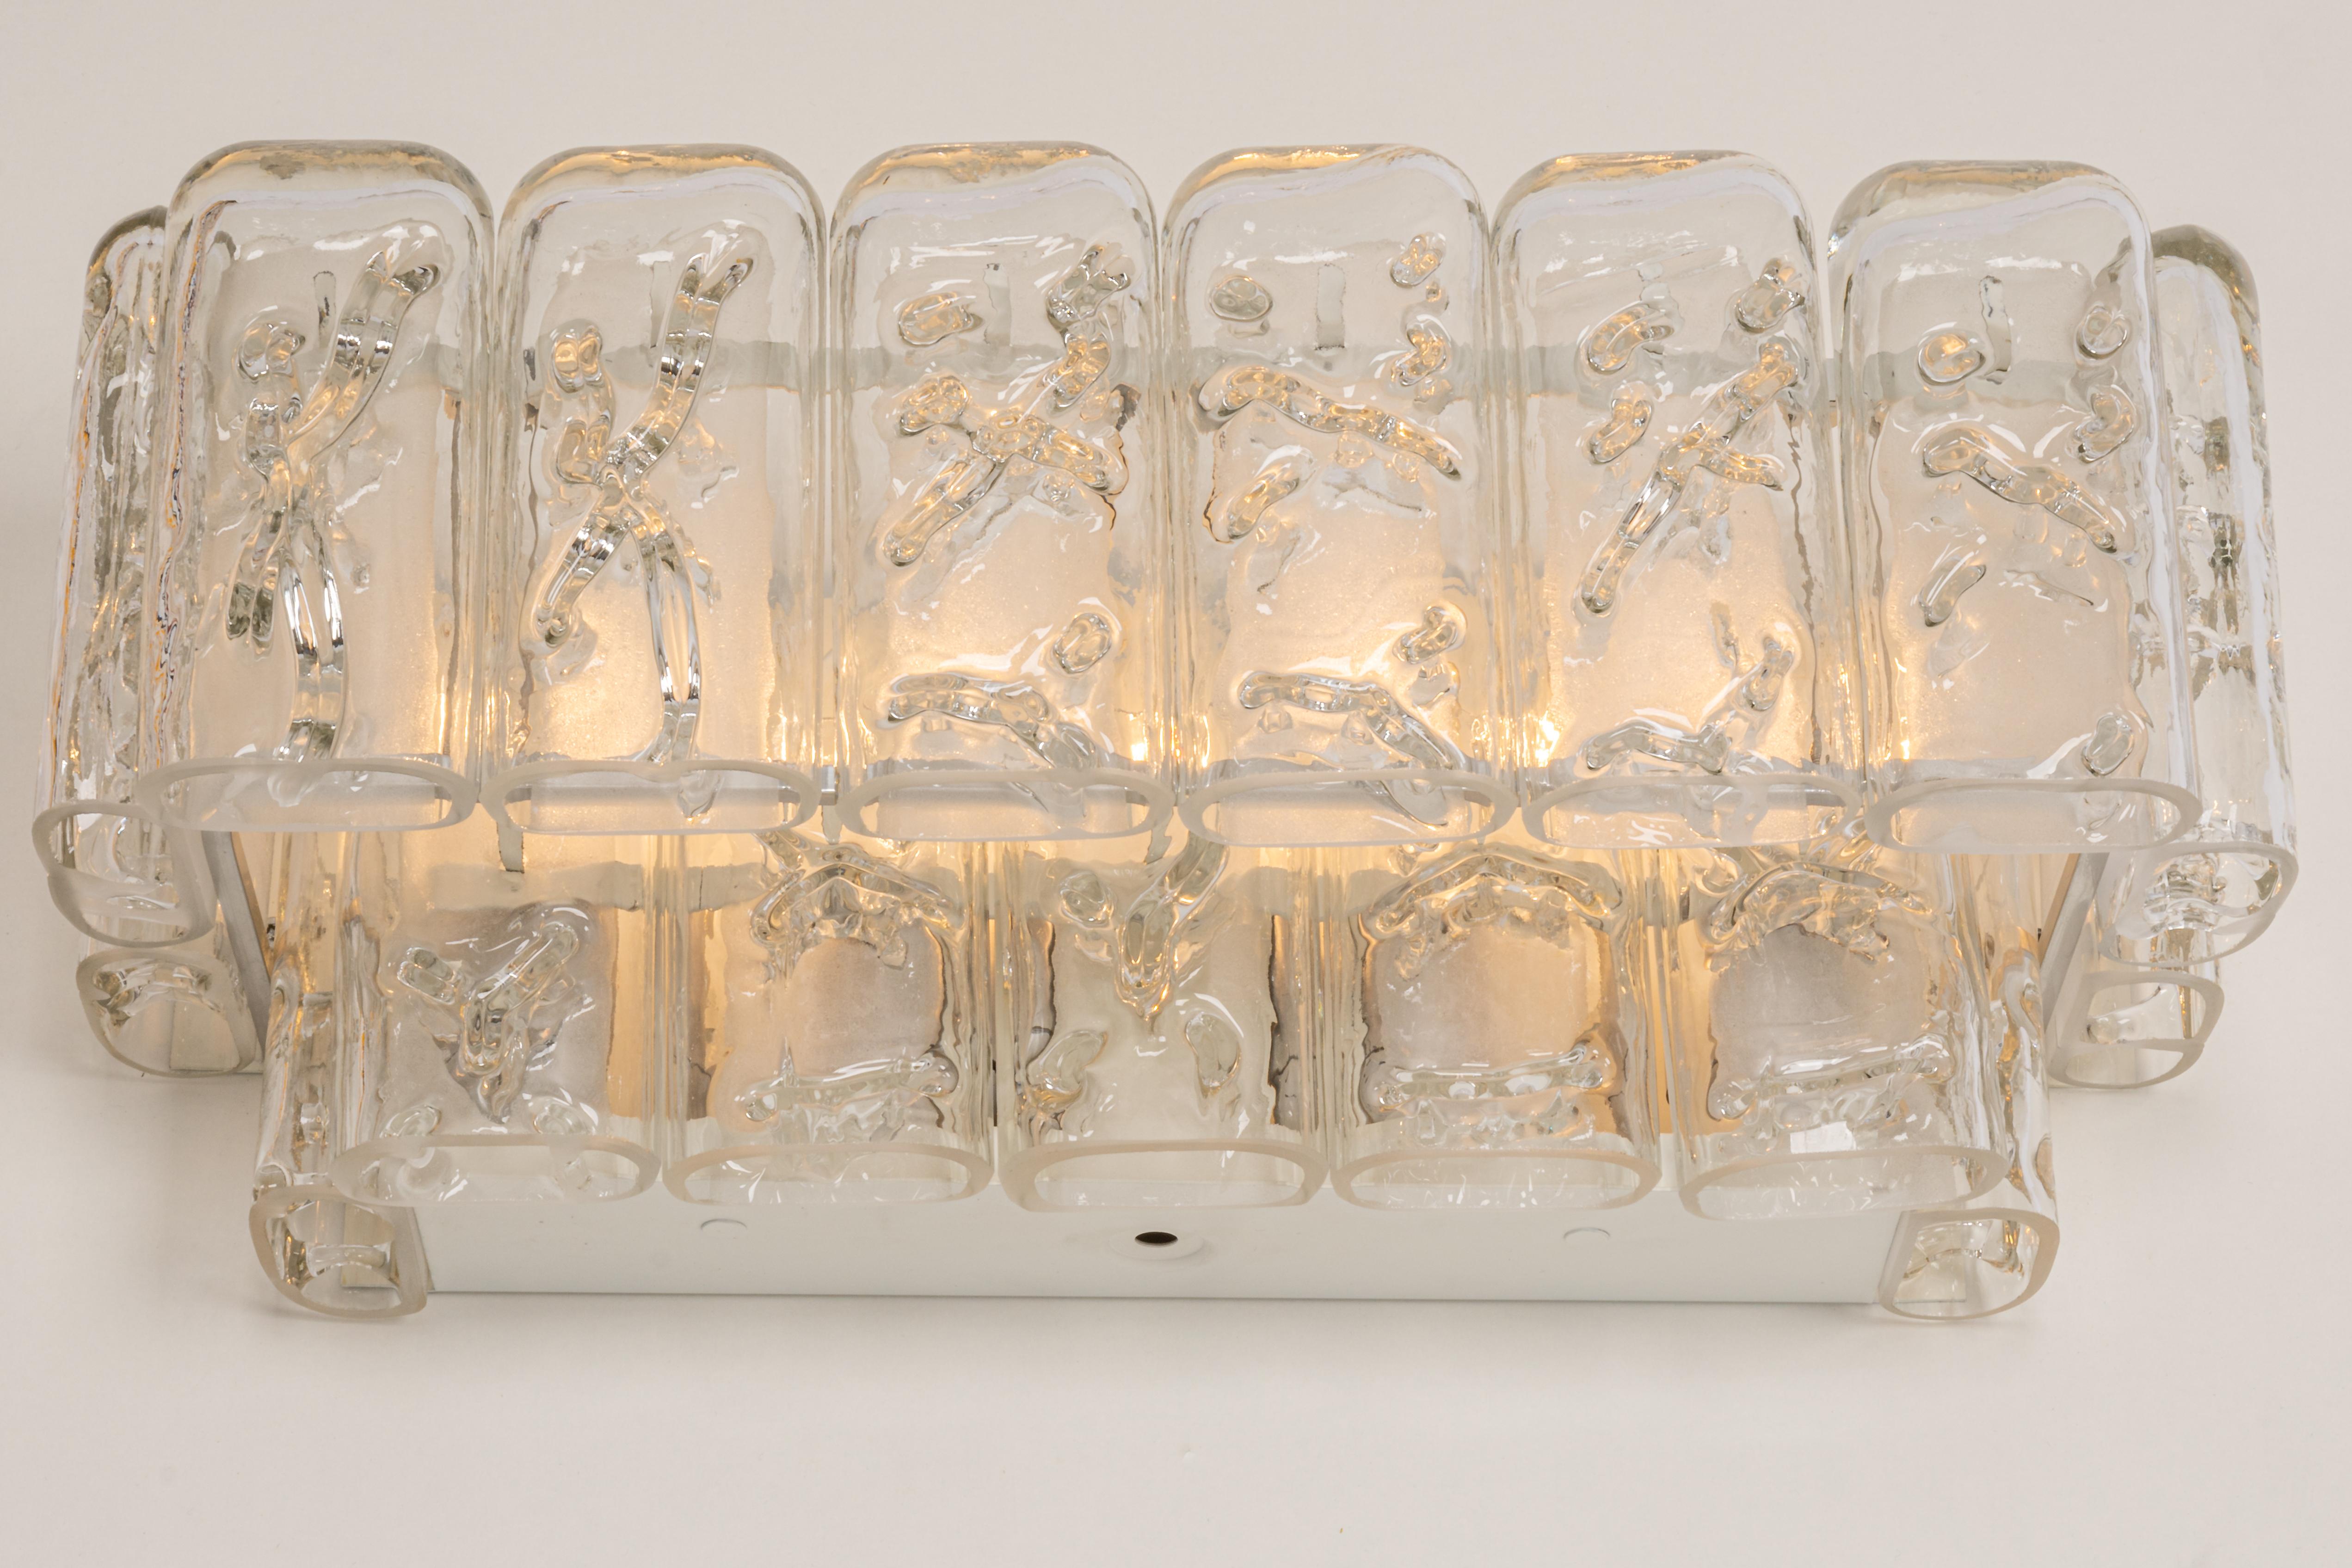 Pair of Large Chrome and Murano Glass Wall Sconces by Doria, Germany, 1970s For Sale 6